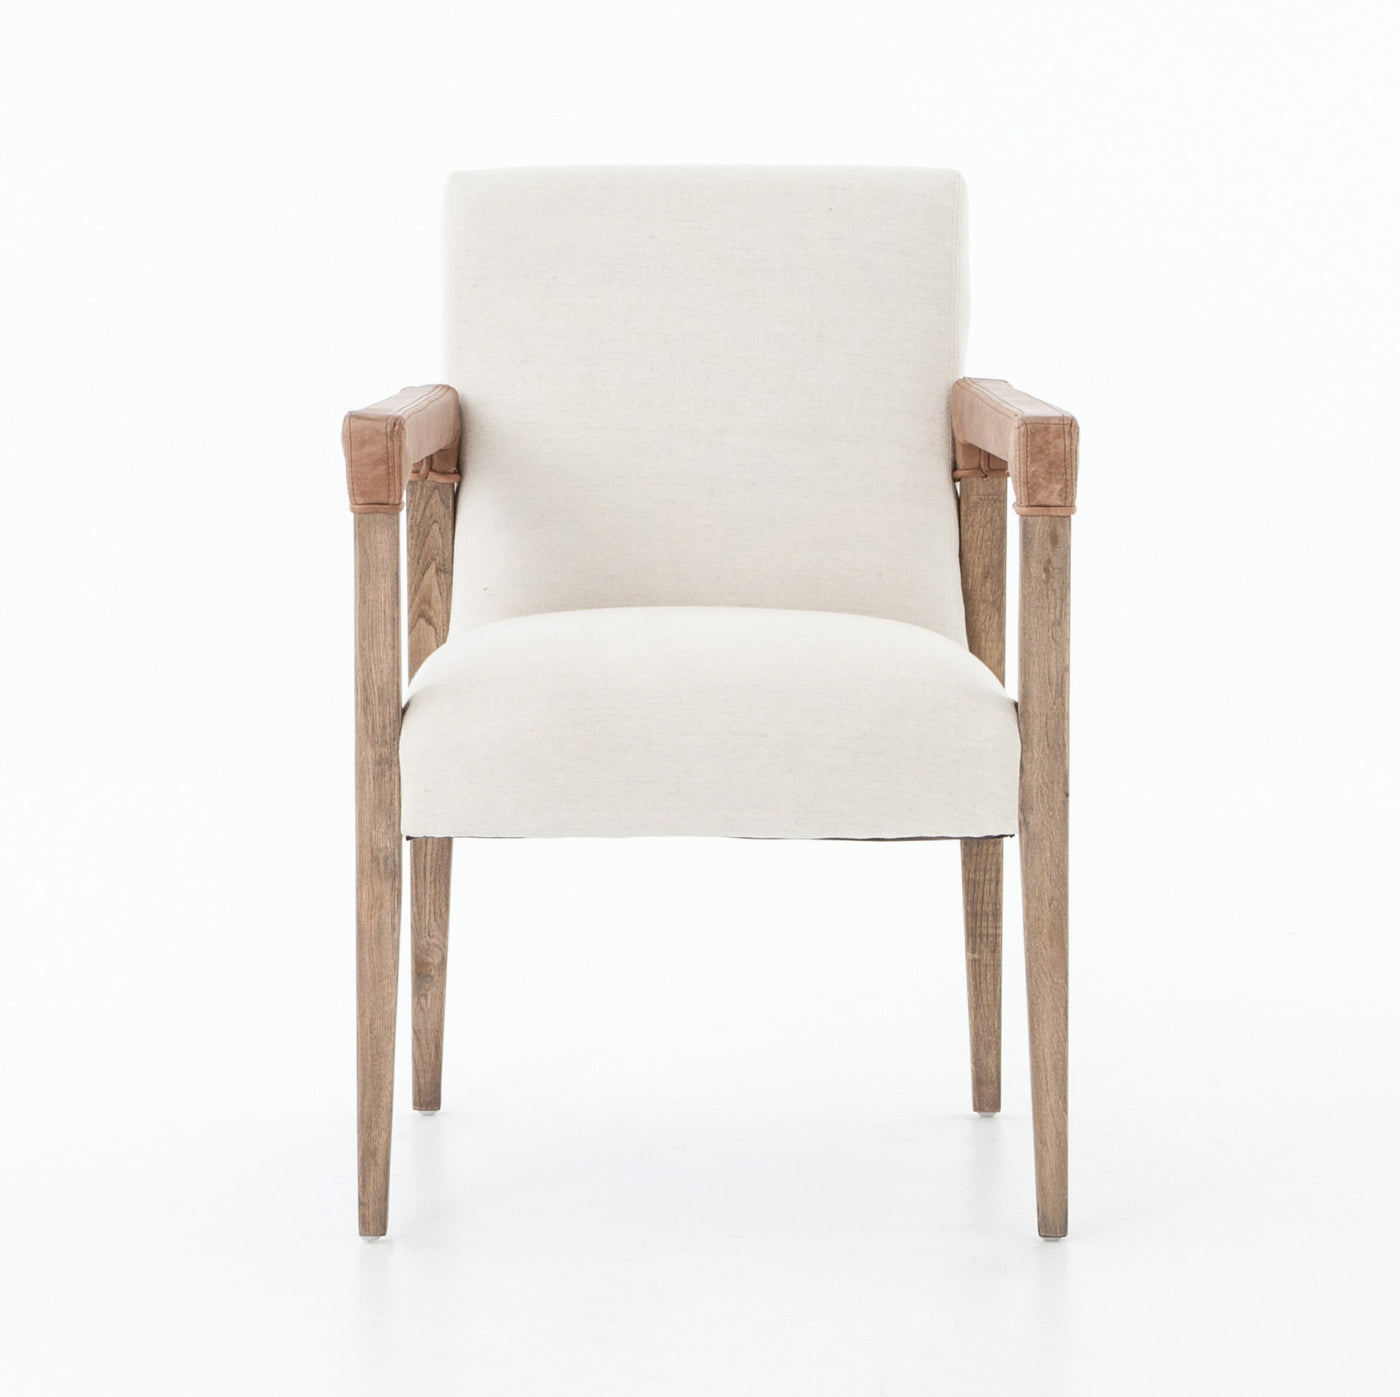 Winslow Dining Chairs- Oatmeal